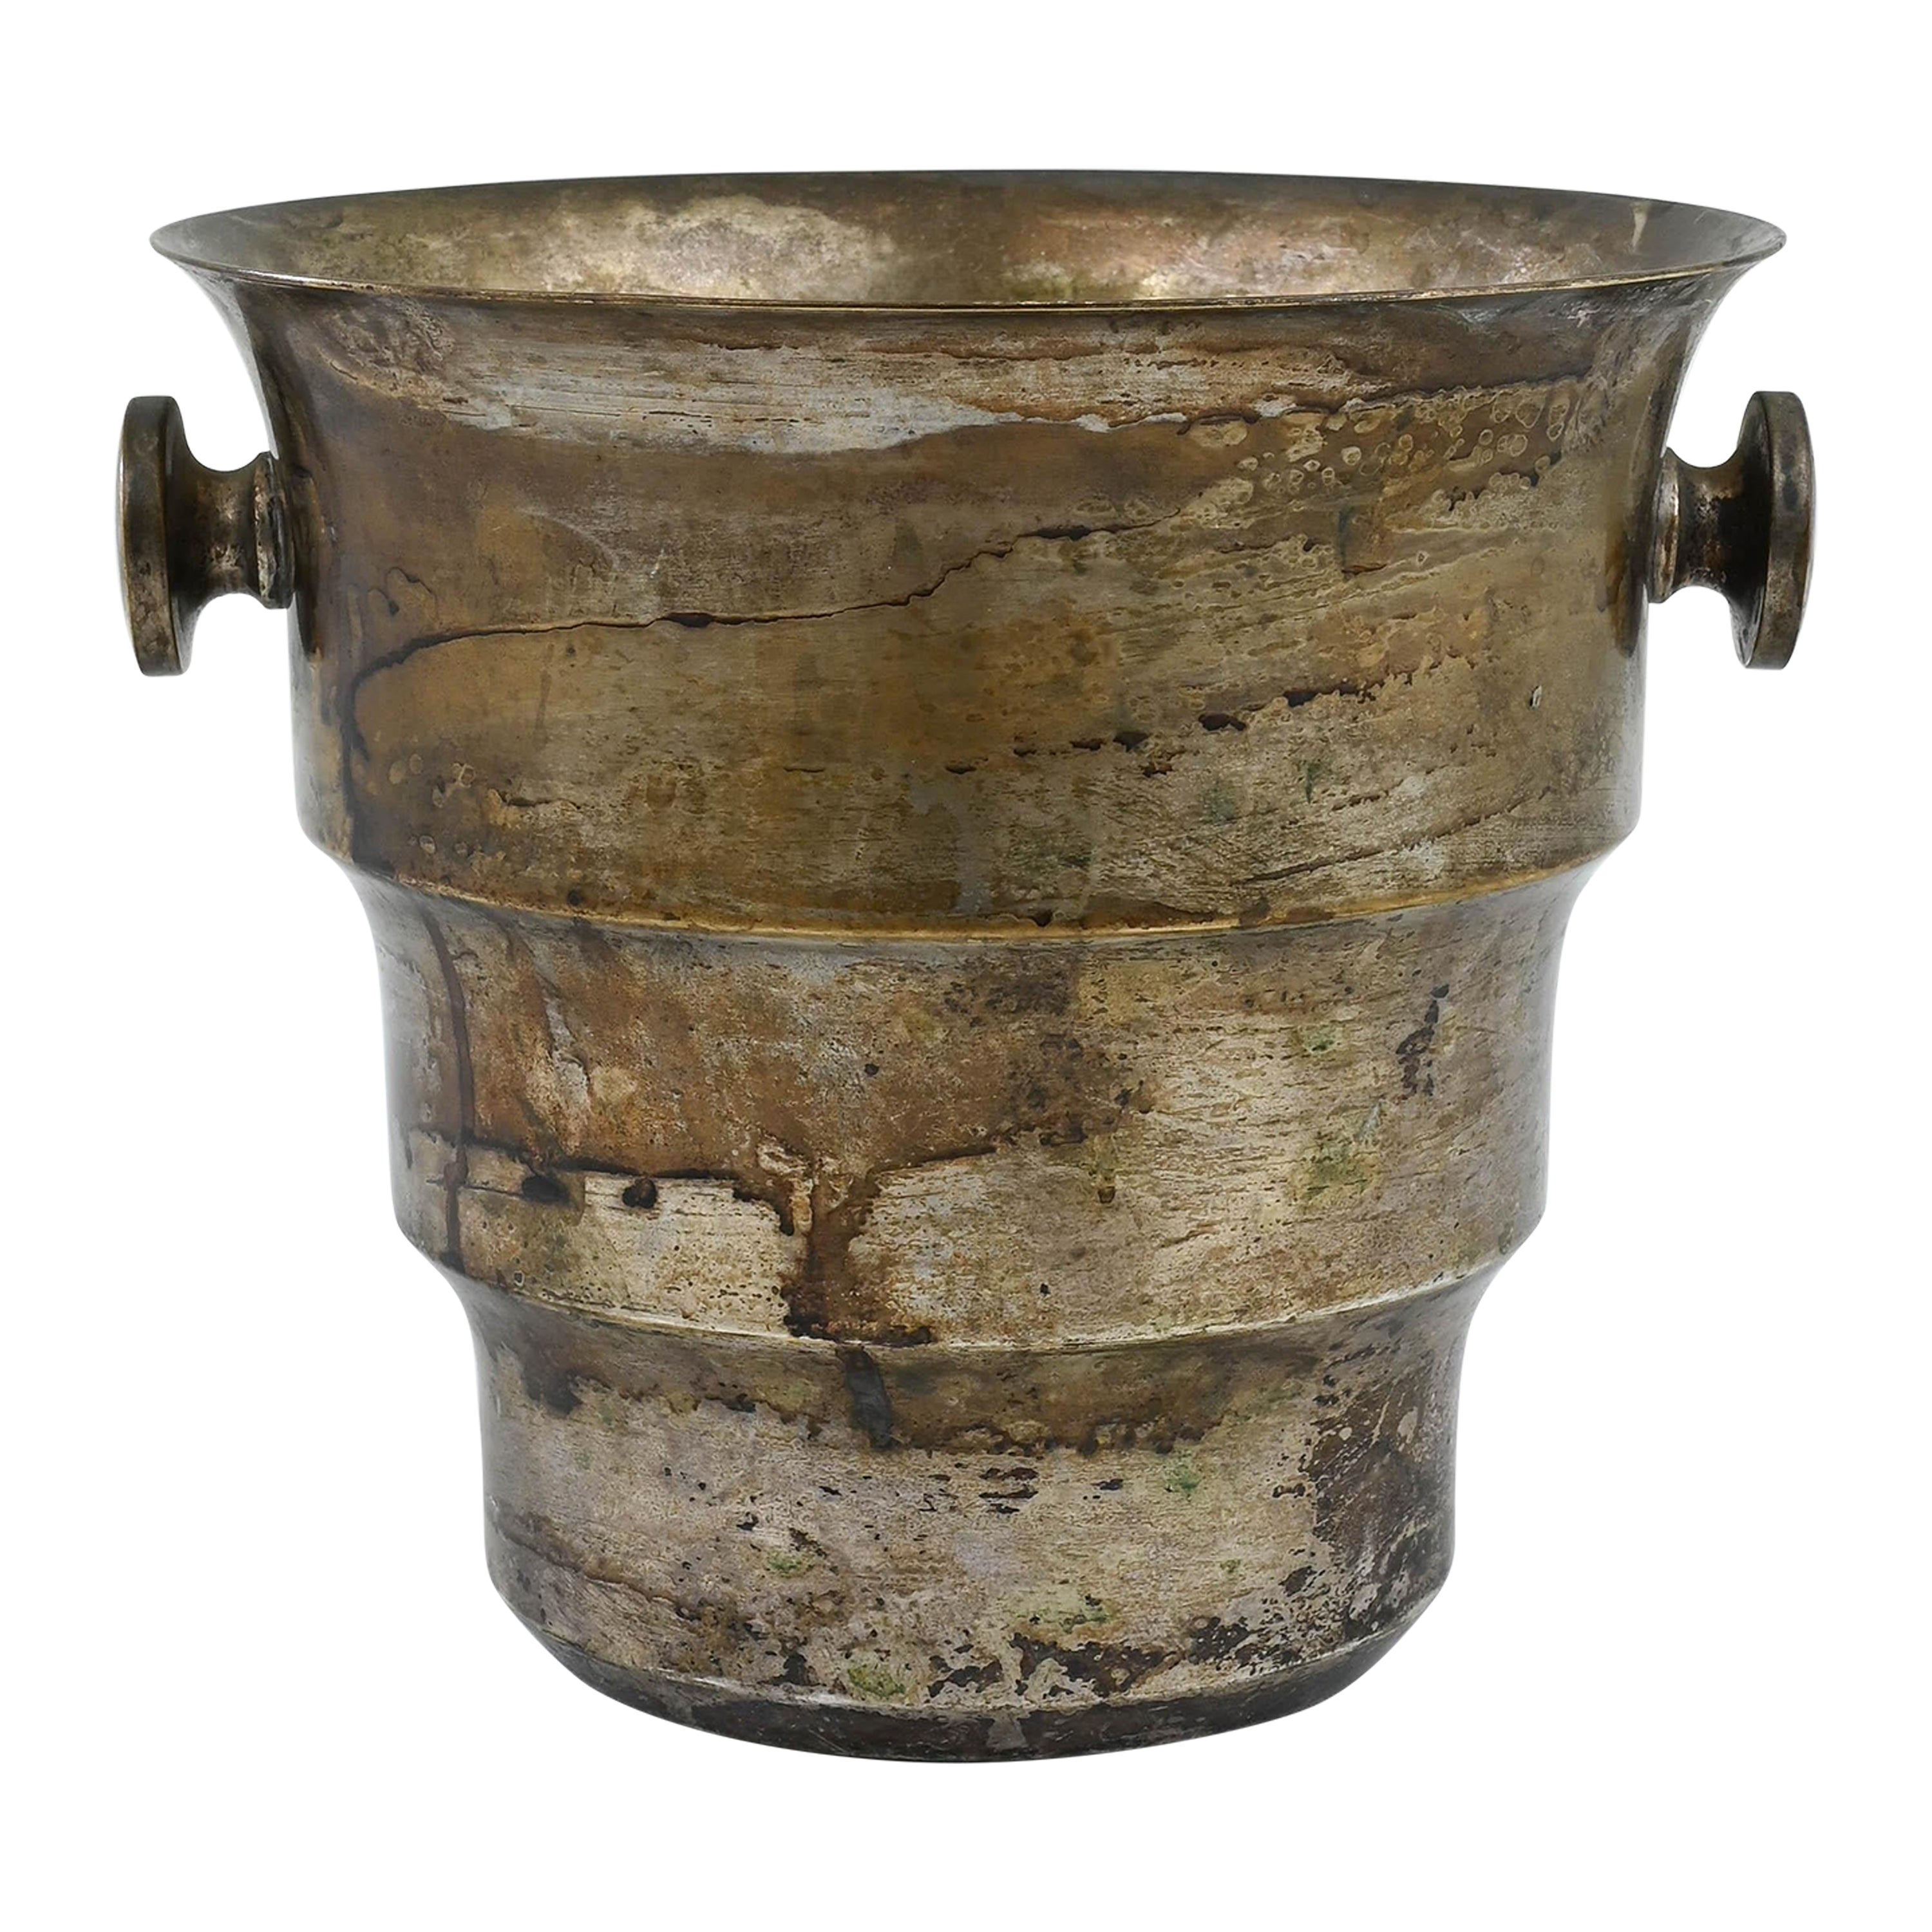 20th Century French Silver-Plated Ice Bucket